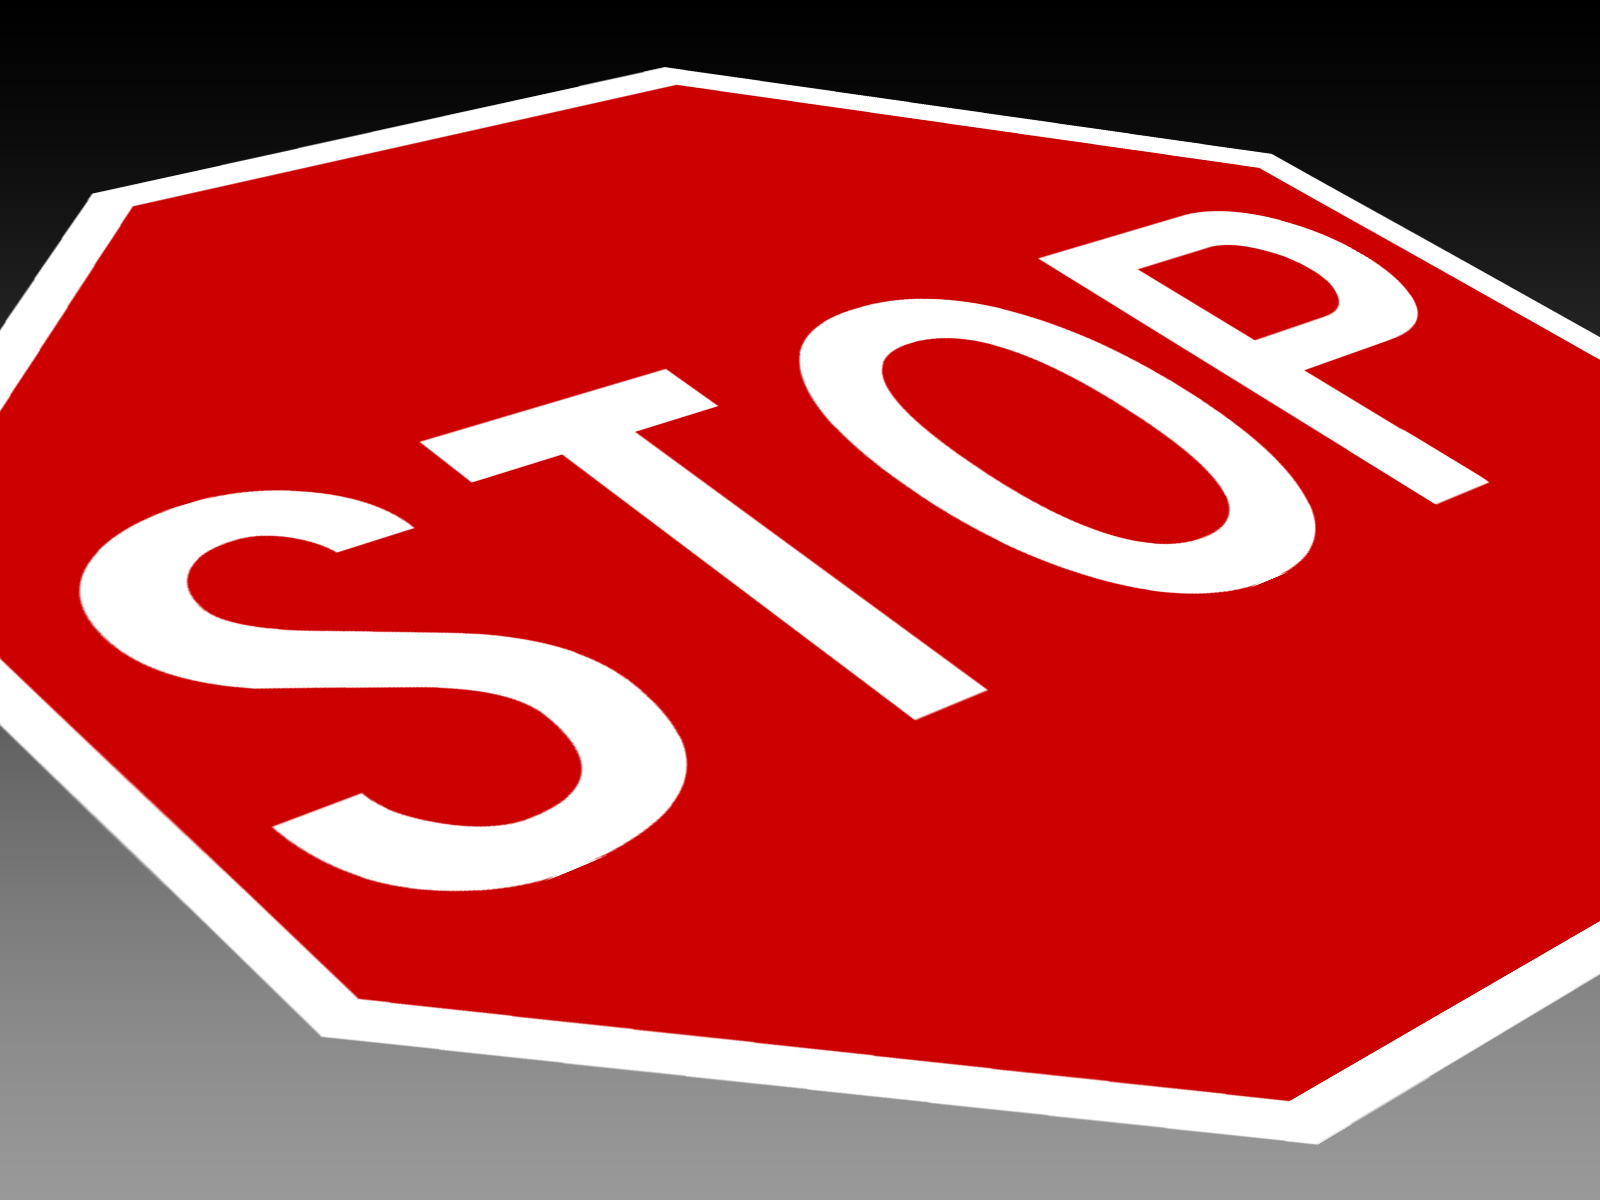 Stop sign angled